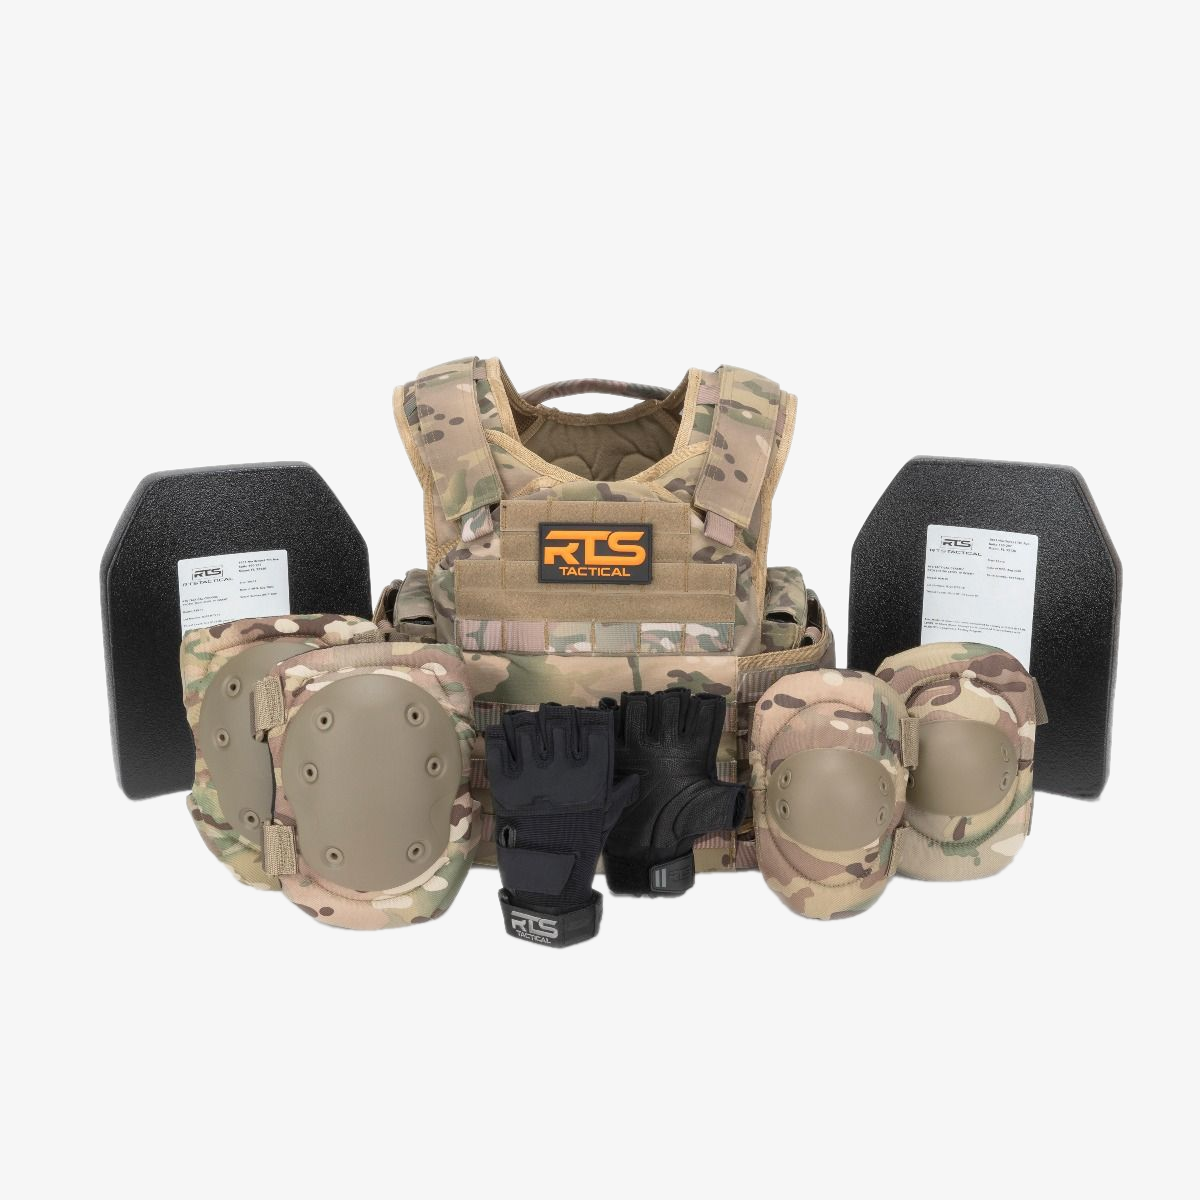 RTS Ultimate Tactical Bundle Level III+ 11x14 Lightweight Special Threat